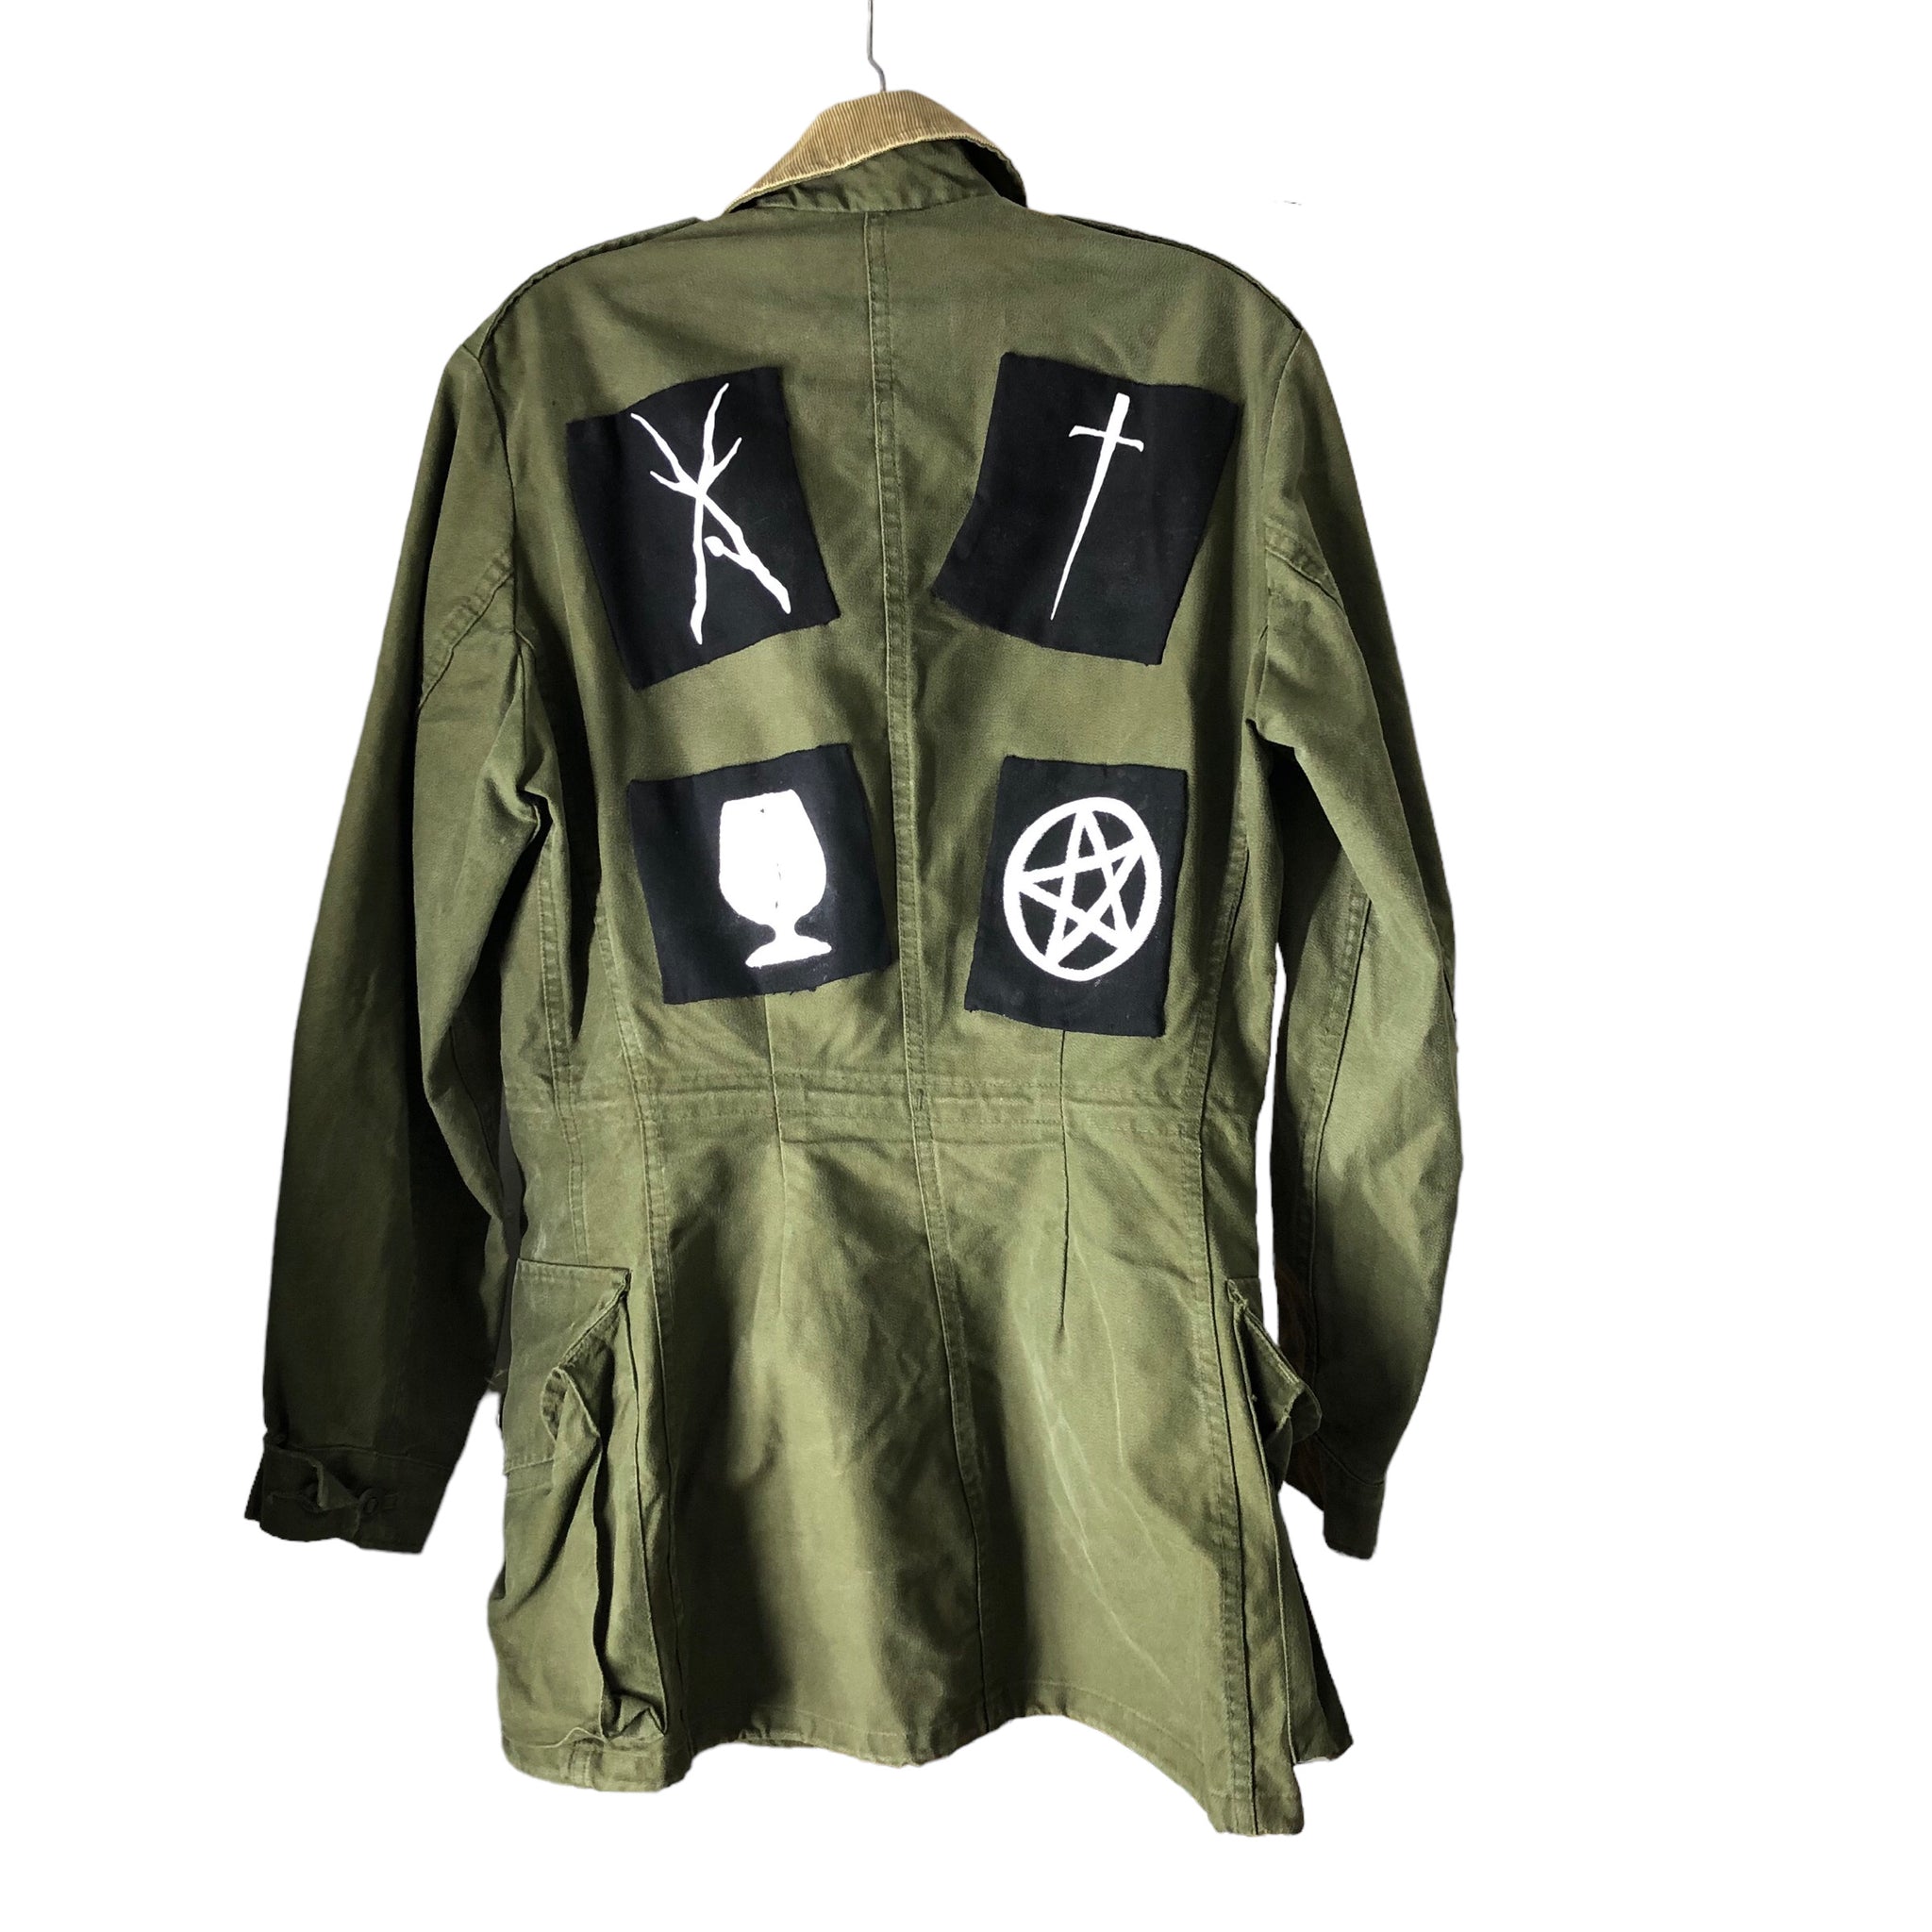 OOAK Tarot Patch Army Jacket by Tooth and Claw x Blim